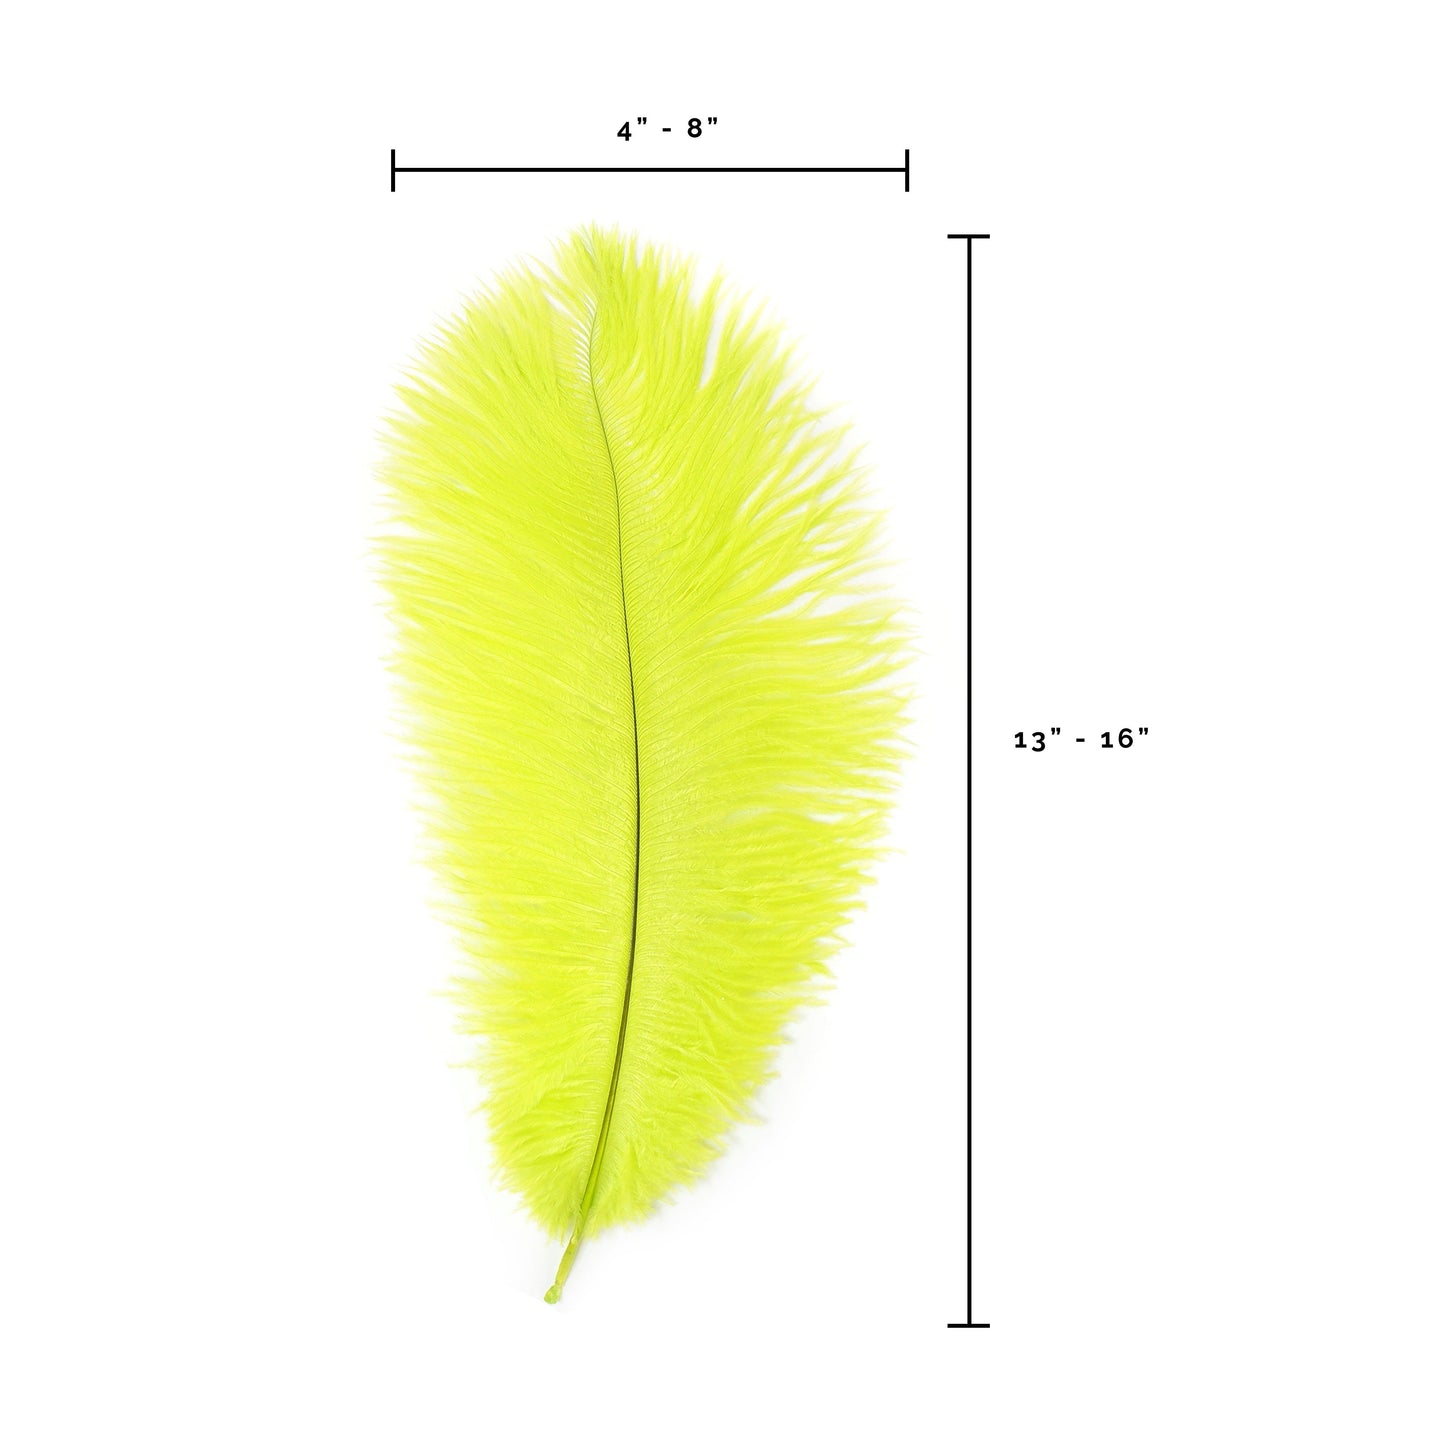 Ostrich Feathers 13-16" Drabs - Lime